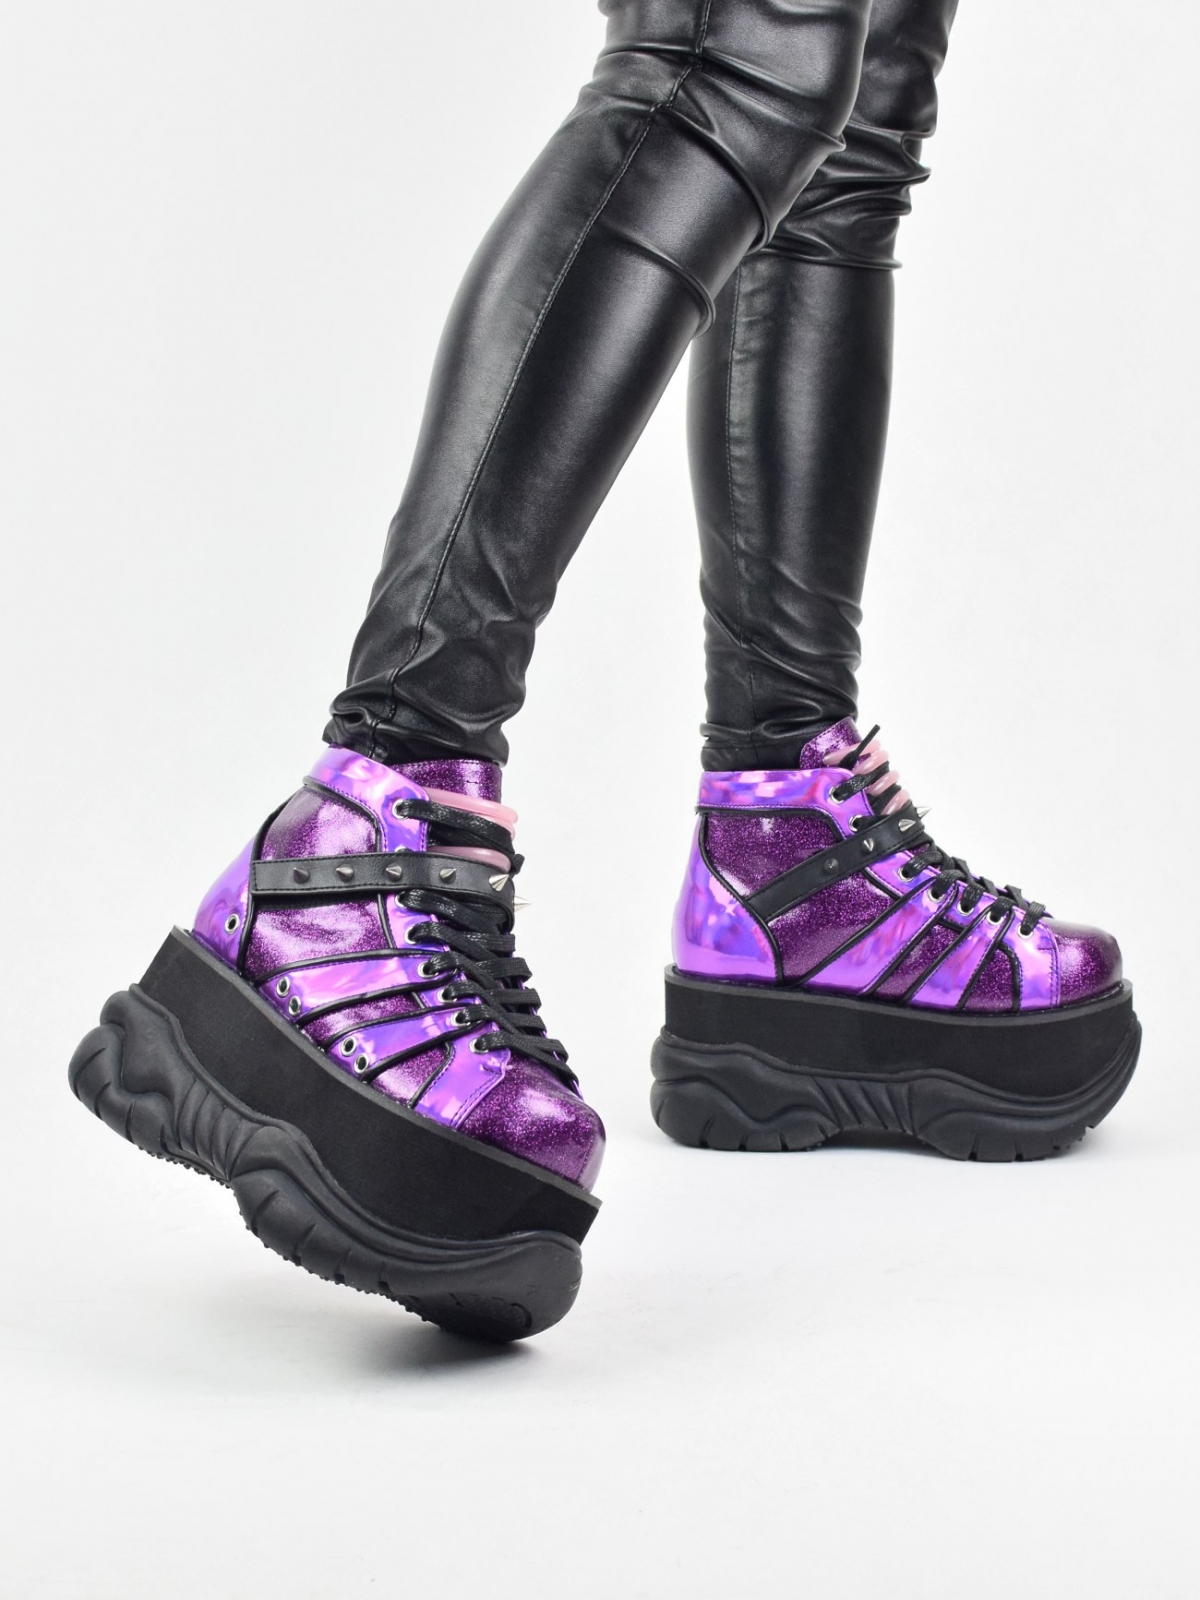 Nep 100 platform lace-up shoes with UV reactive tubbing on tongue in purple